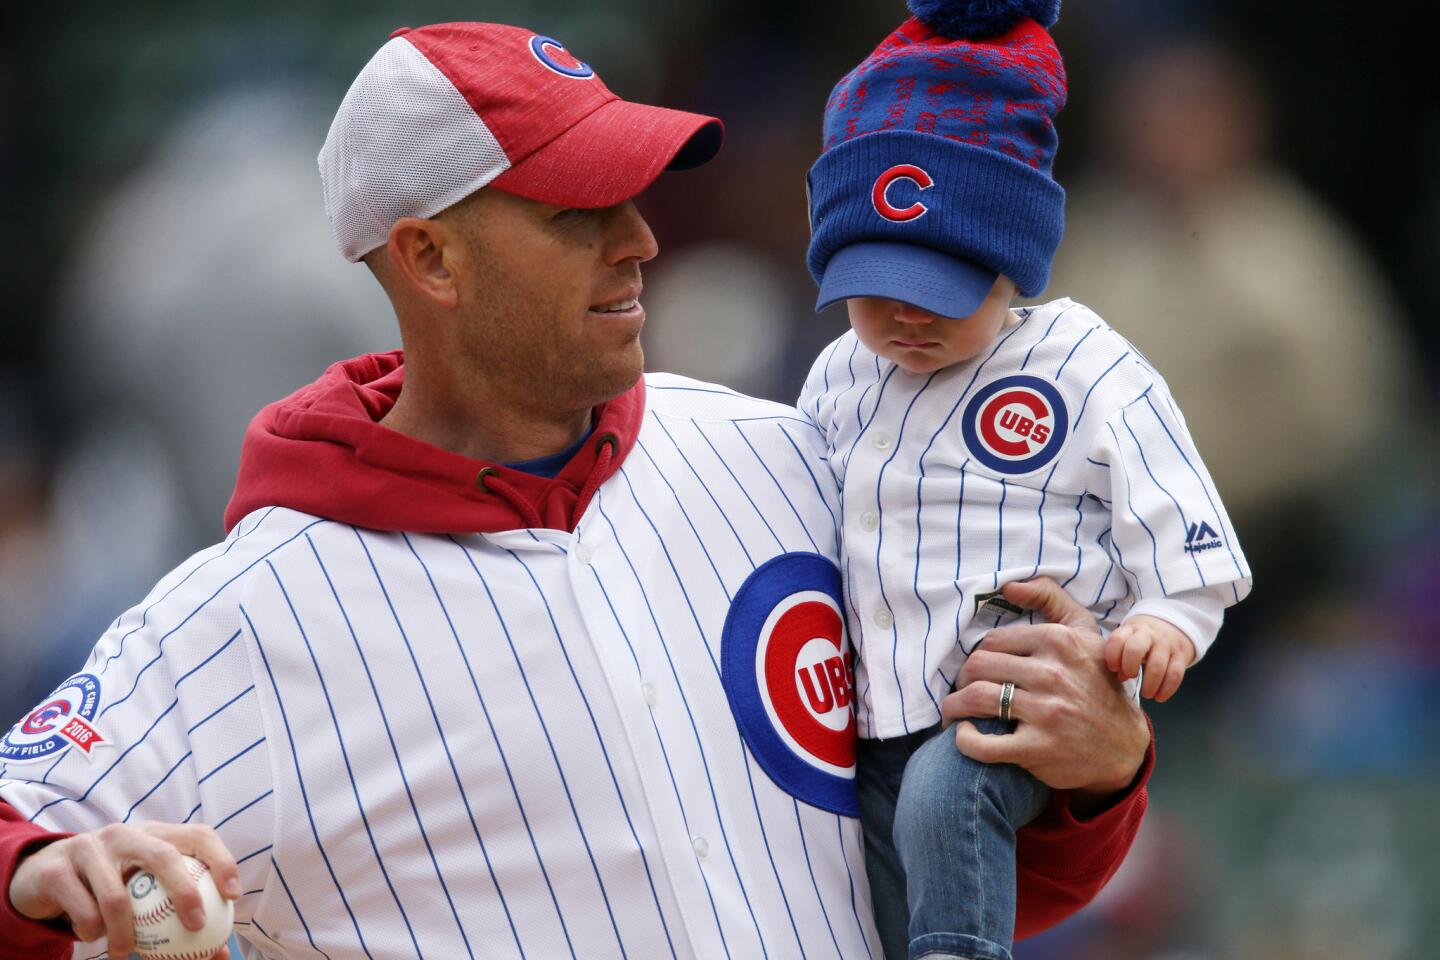 Robbie Gould looks to throw out the first pitch prior to a Cubs-Pirates game at Wrigley Field on May 14, 2016.